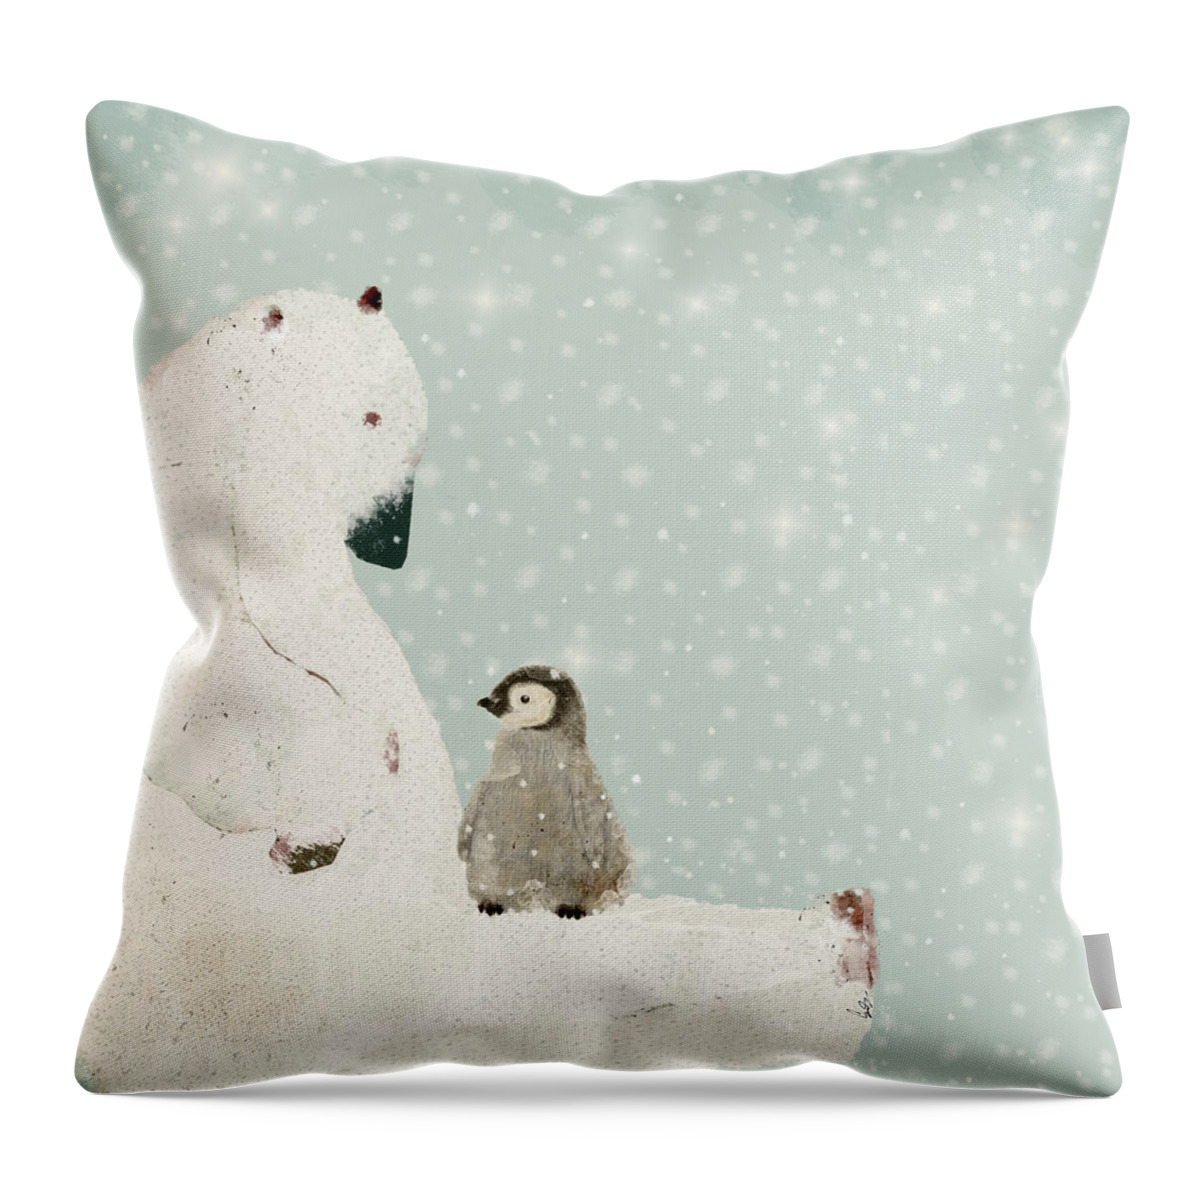 Polar Bears Throw Pillow featuring the painting Penguin And Bear by Bri Buckley